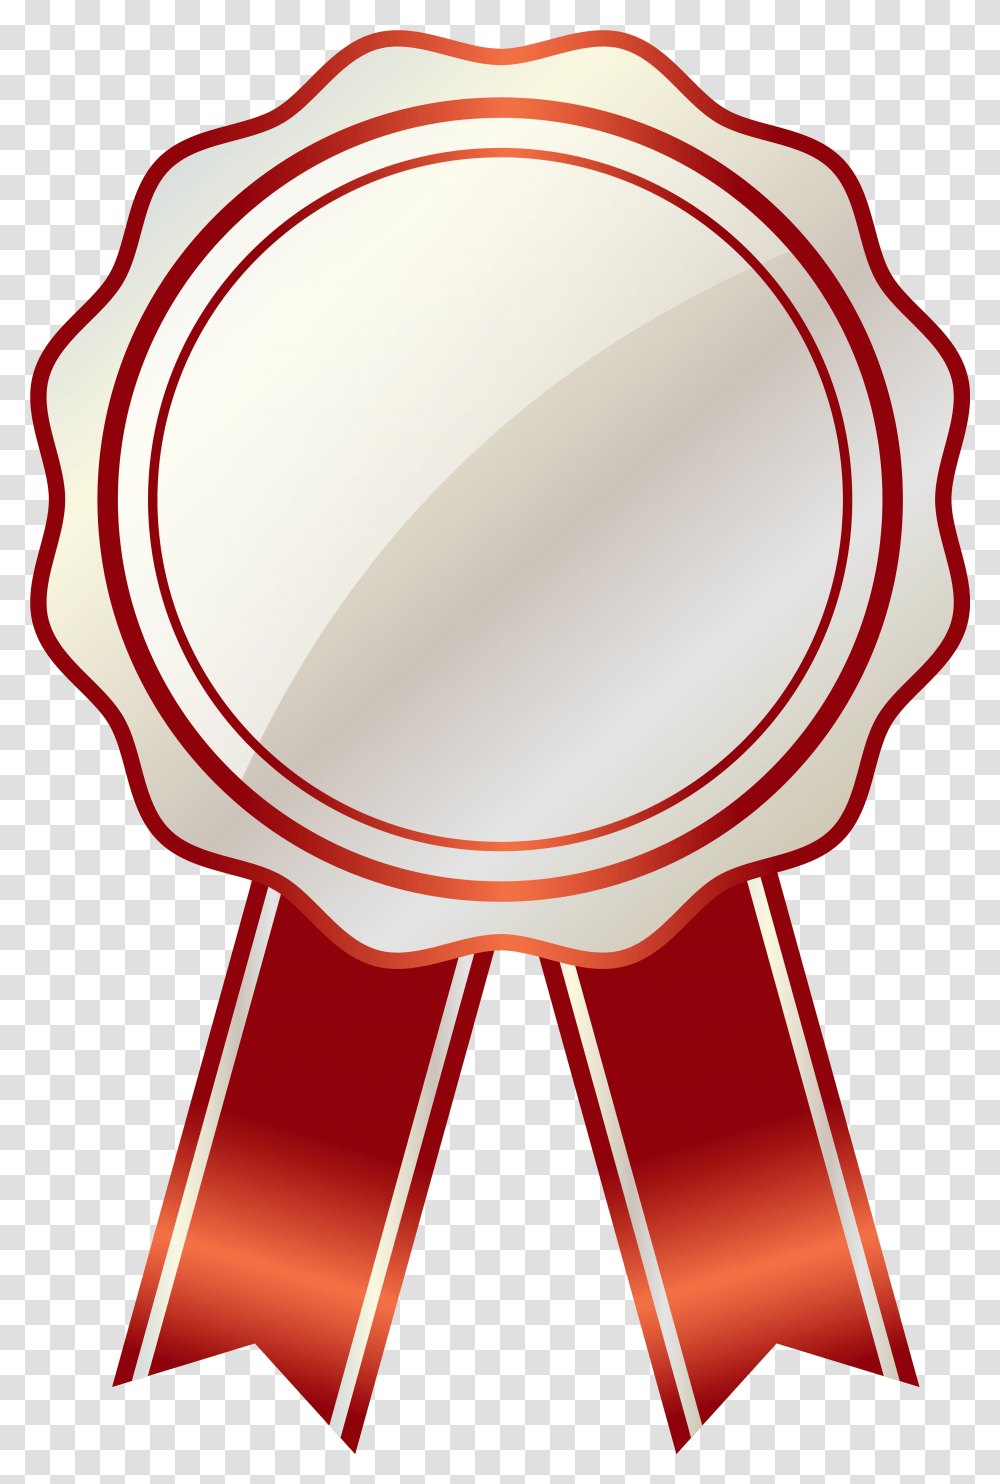 White With Red Ribbon Graduation Ribbon Head Design, Mirror, Lamp, Oval Transparent Png